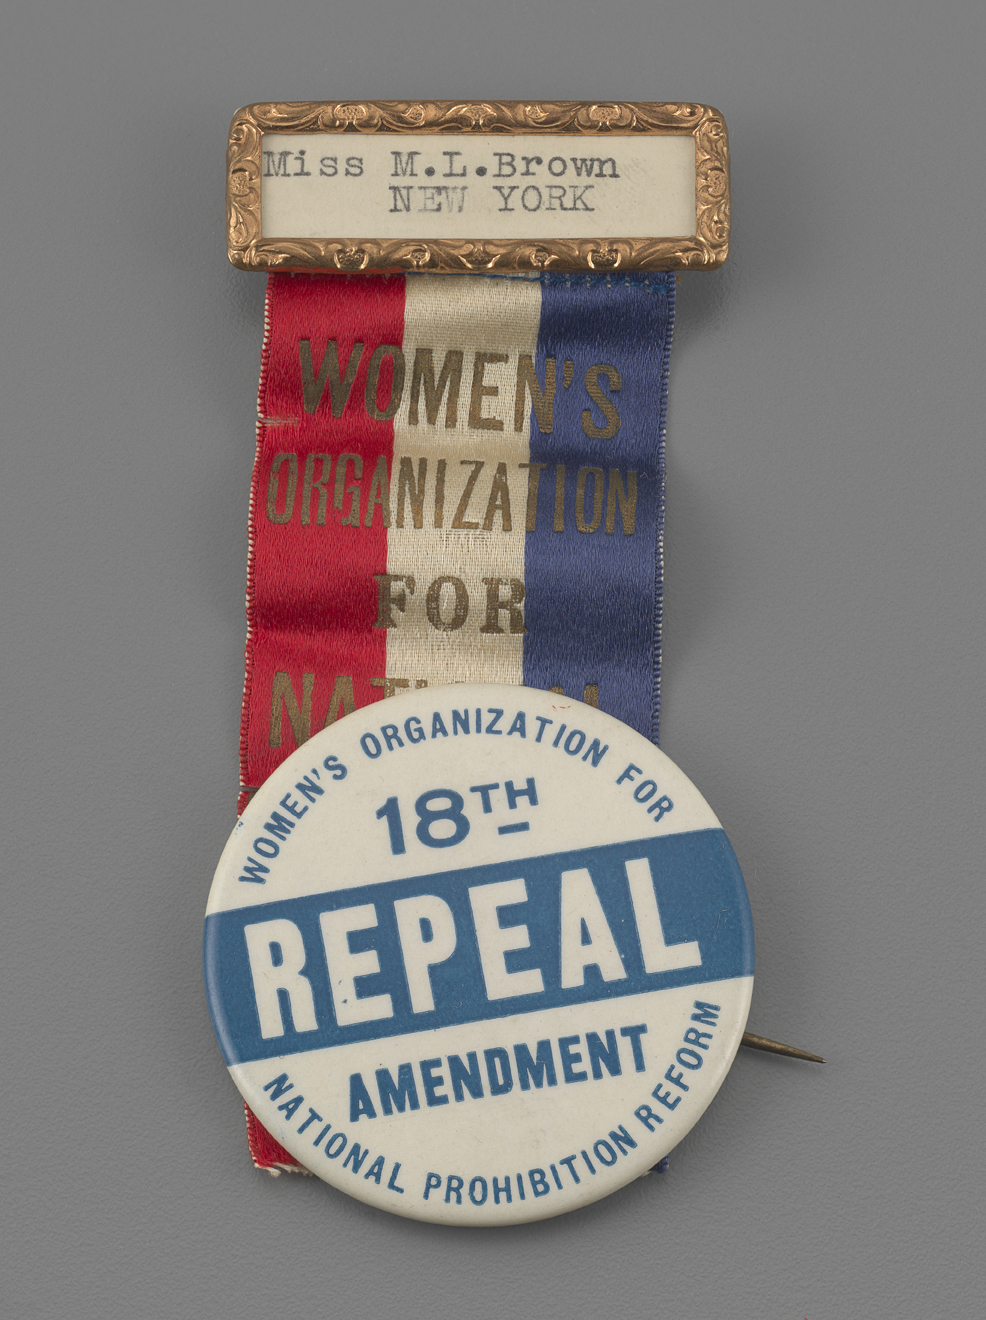 Badge from Margaret Brown Remington, Secretary of the New York State Meetings Committee of the Women’s Organization for National Prohibition Reform